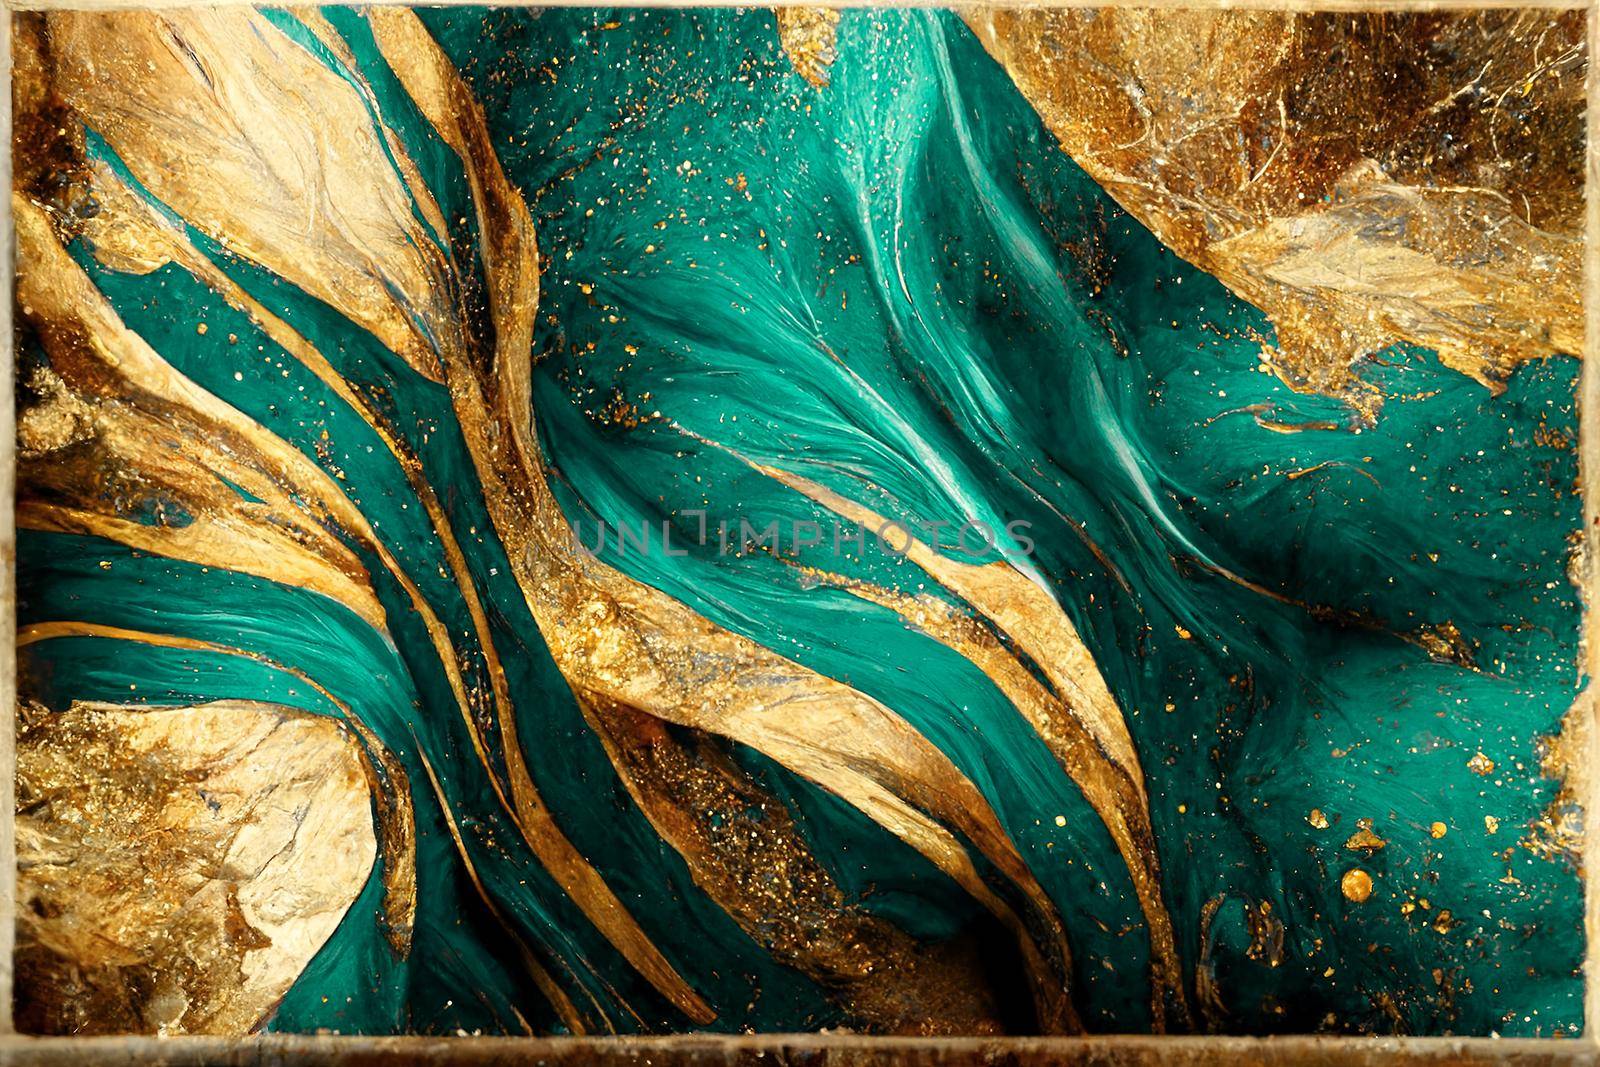 Spectacular realistic abstract backdrop of a whirlpool of teal and gold. Digital art 3D illustration. Mable with liquid texture like turbulent waves background.